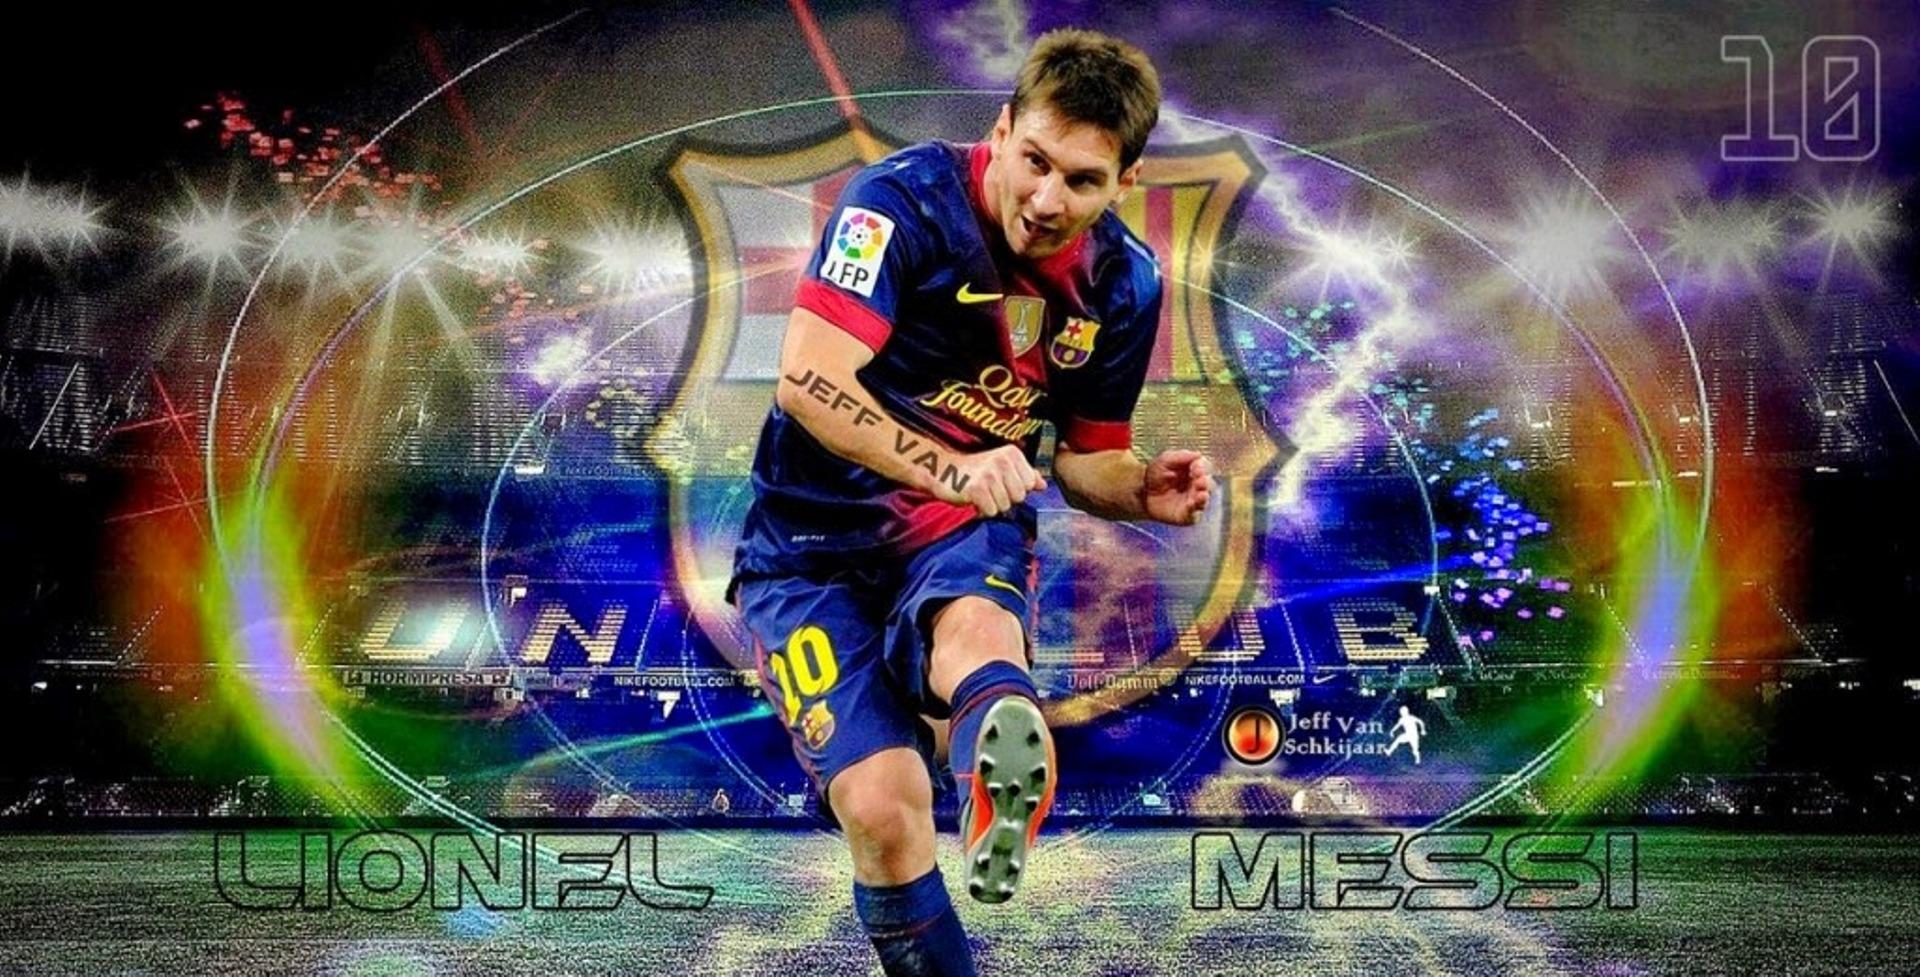 Lionel Messi 2014 2015 Barcelona Wallpapers Wallpaper For | HD ...